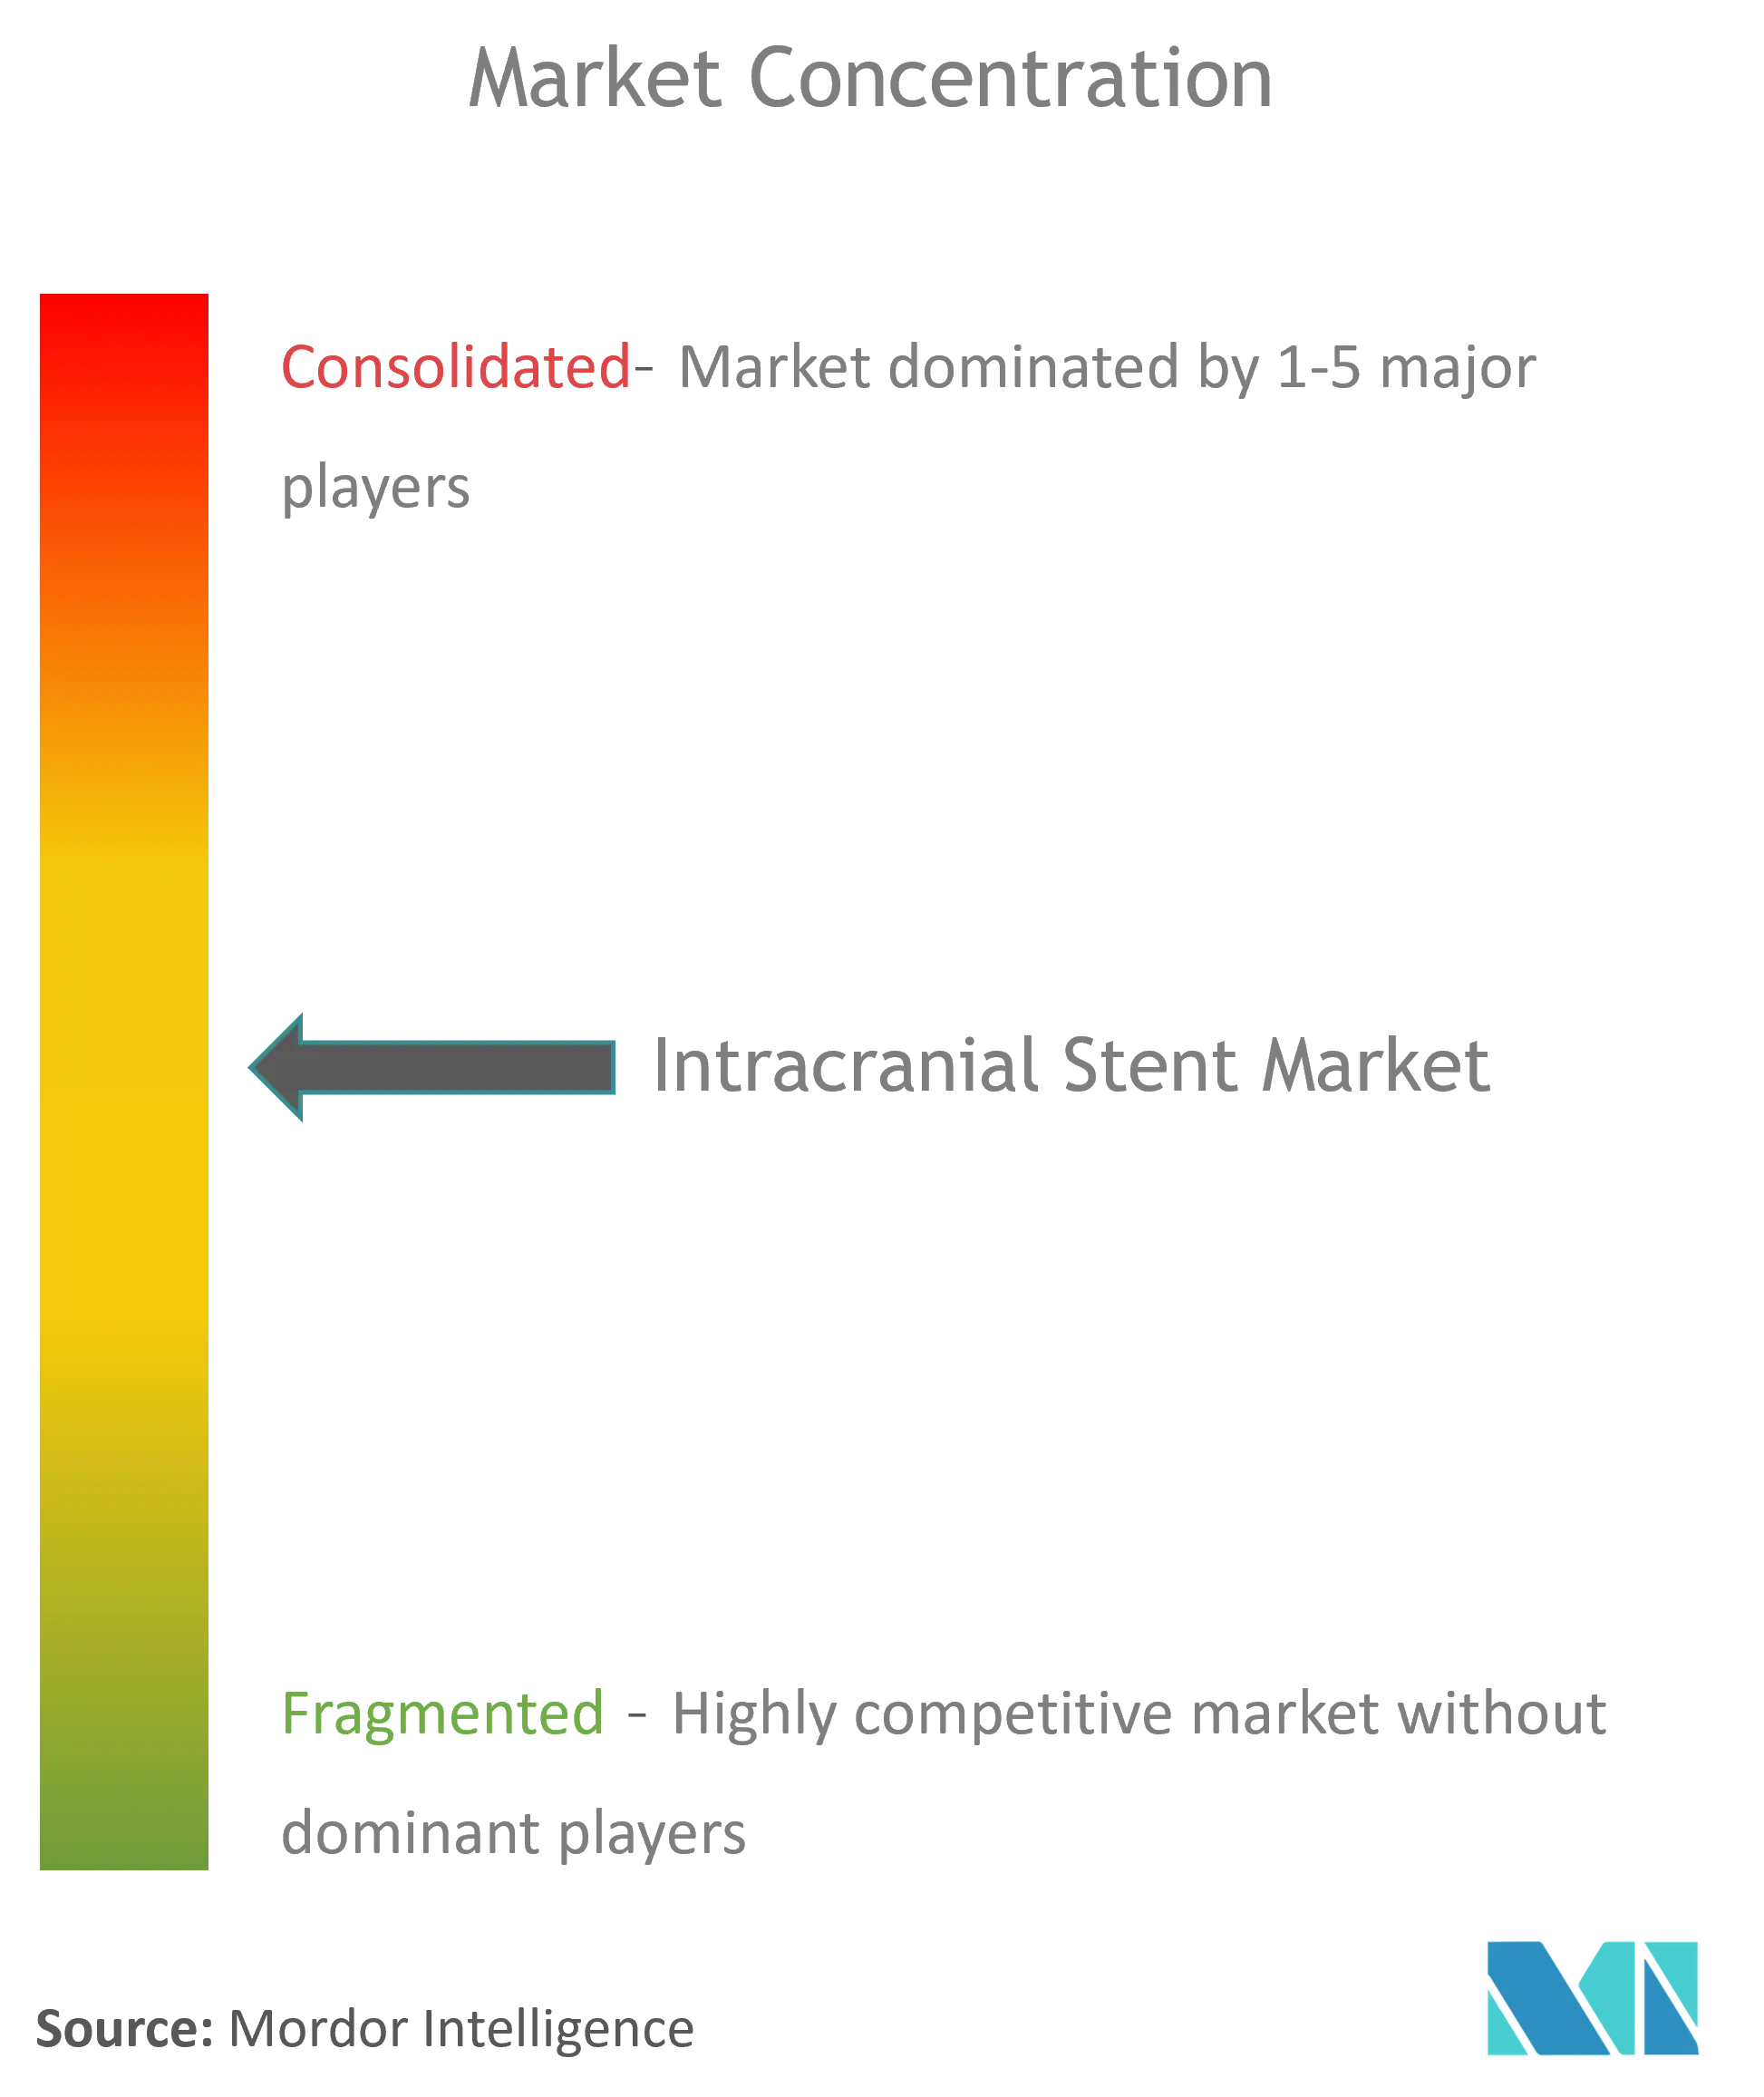 Intracranial Stents Market Concentration